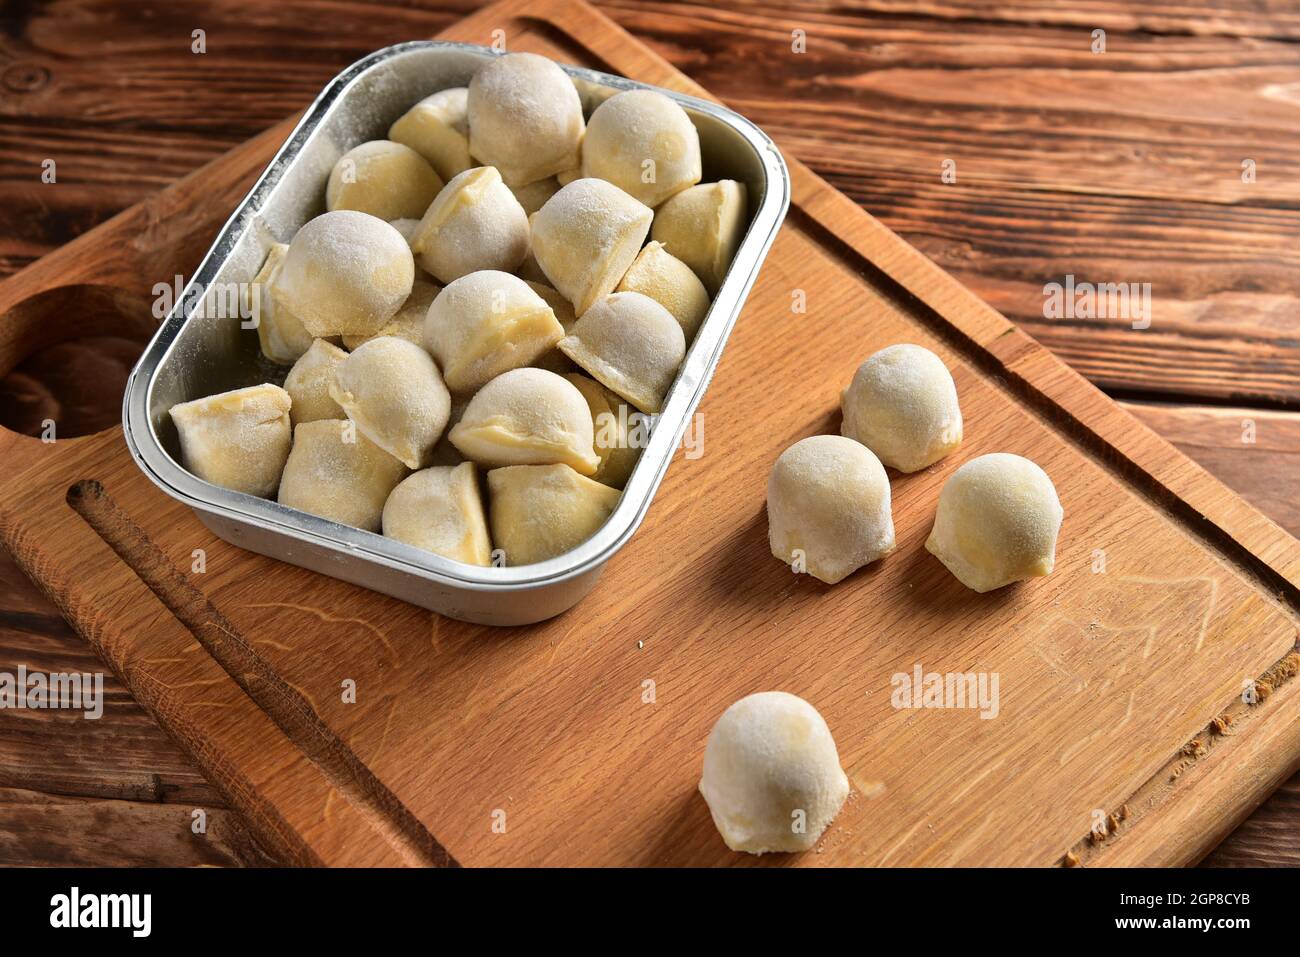 Frozen homemade raw food of ravioli on wooden board table. Stock Photo